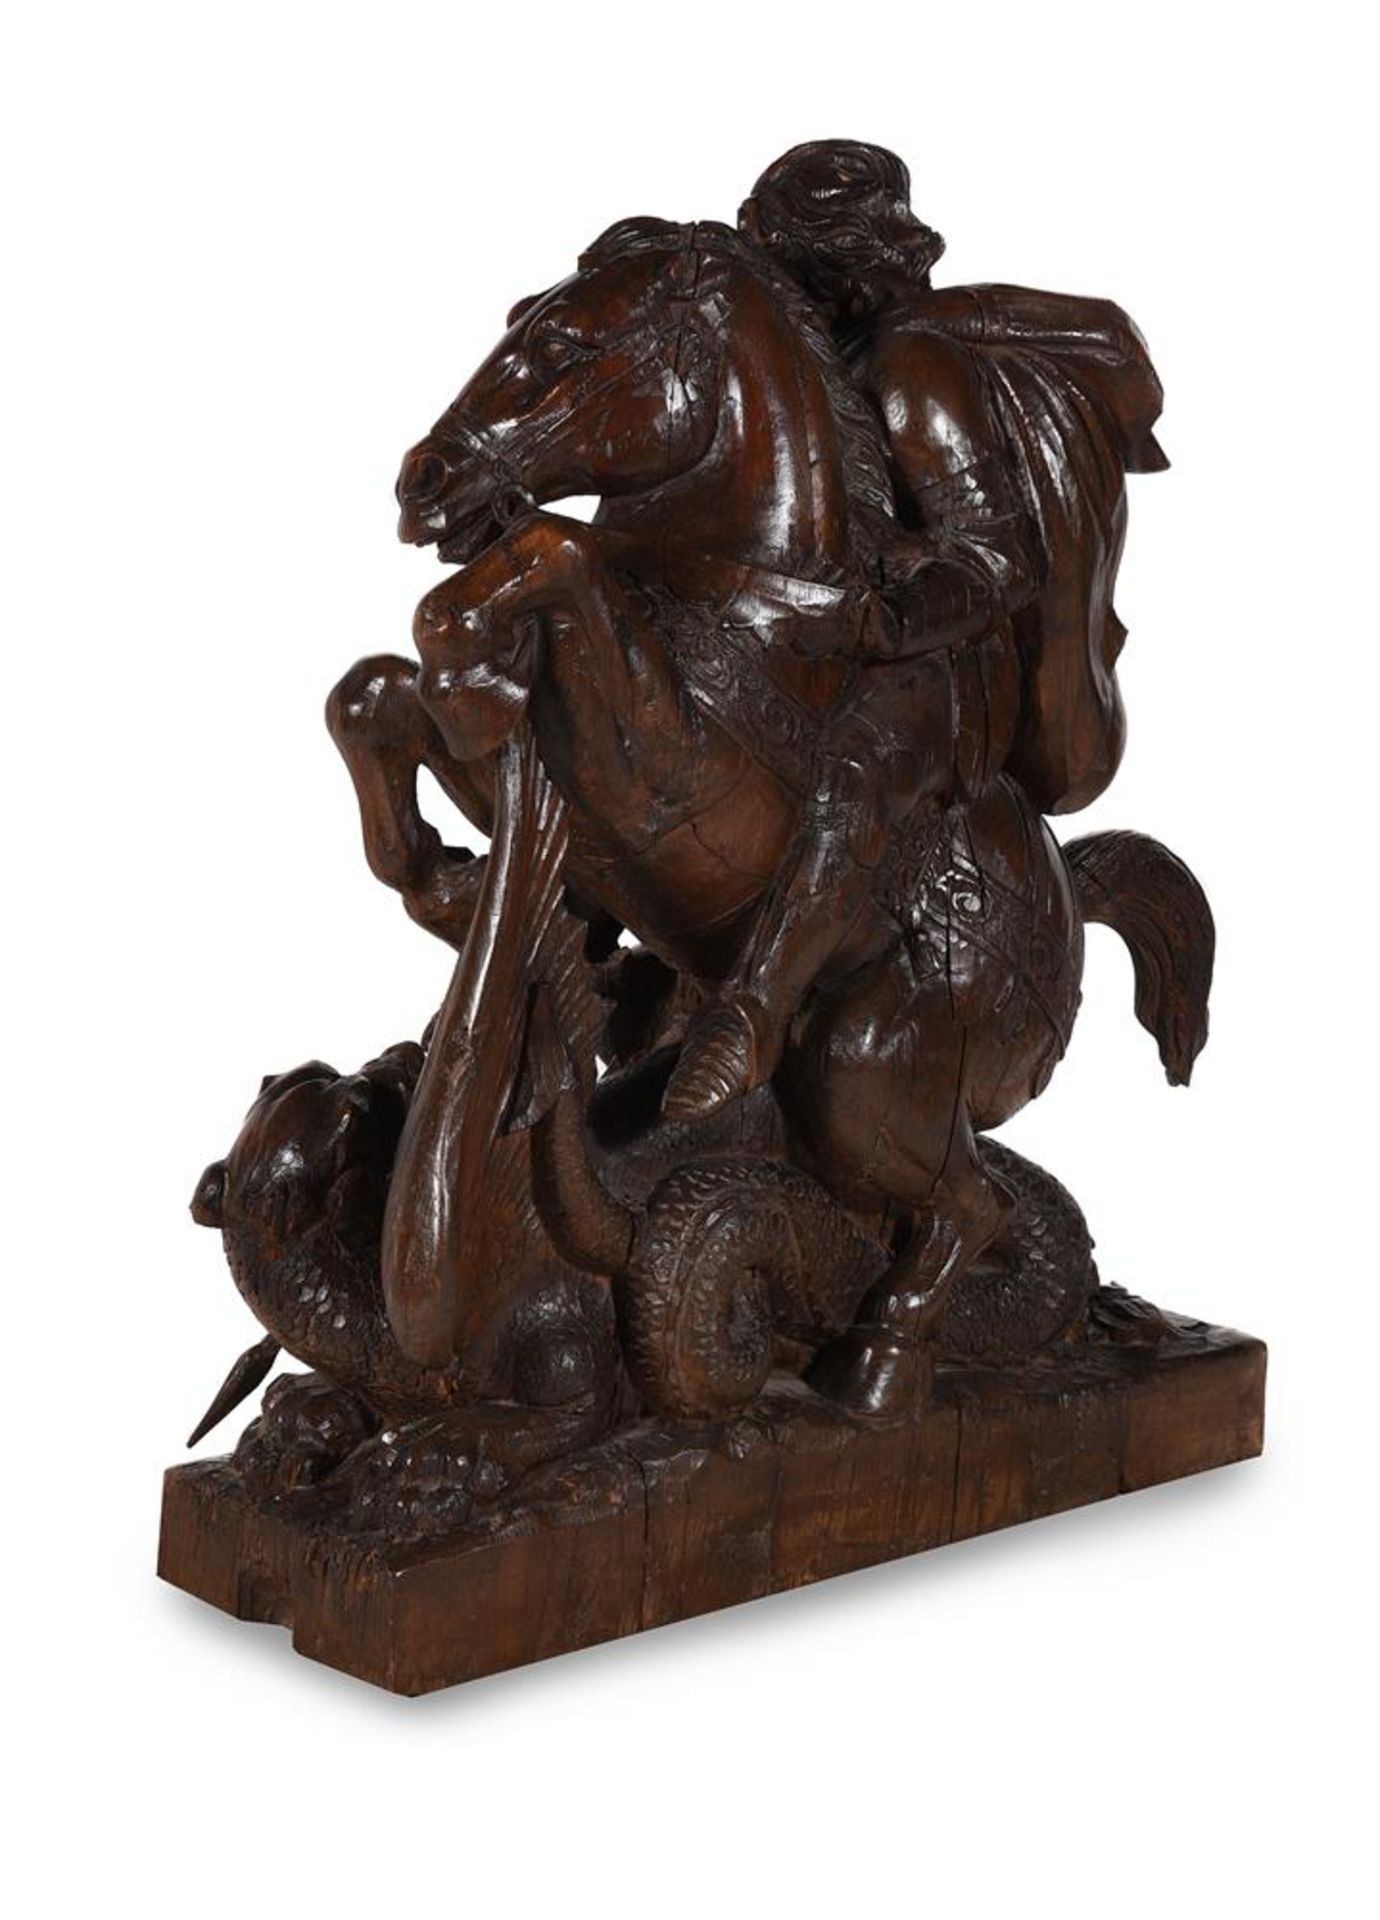 A LARGE CARVED OAK MODEL OF ST. GEORGE AND THE DRAGON, PROBABLY EARLY/MID 19TH CENTURY - Image 3 of 7